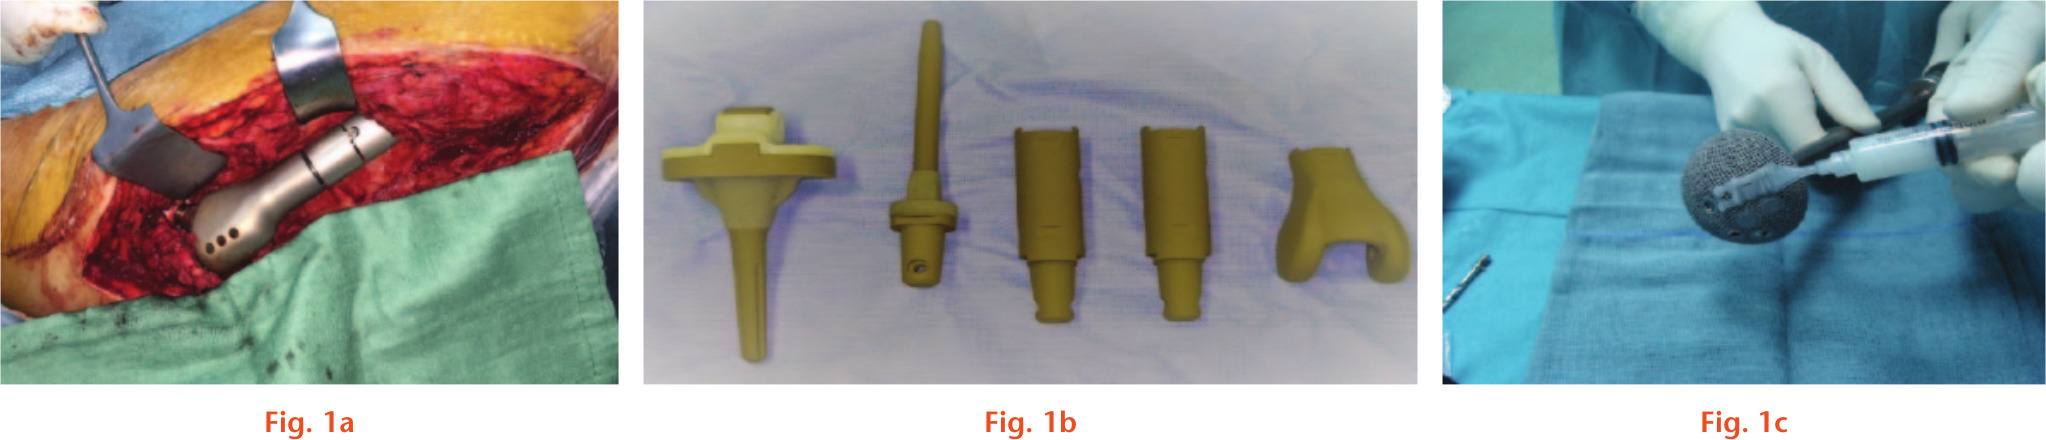 Fig. 1 
          Examples of antibacterial coating of joint prosthesis: a) silver-coated hip tumour prosthesis; b) iodine-coated tumour prosthesis; c) vancomycin-loaded Defensive Antibacterial Coating (DAC) hydrogel, applied at surgery on an acetabular titanium component.
        